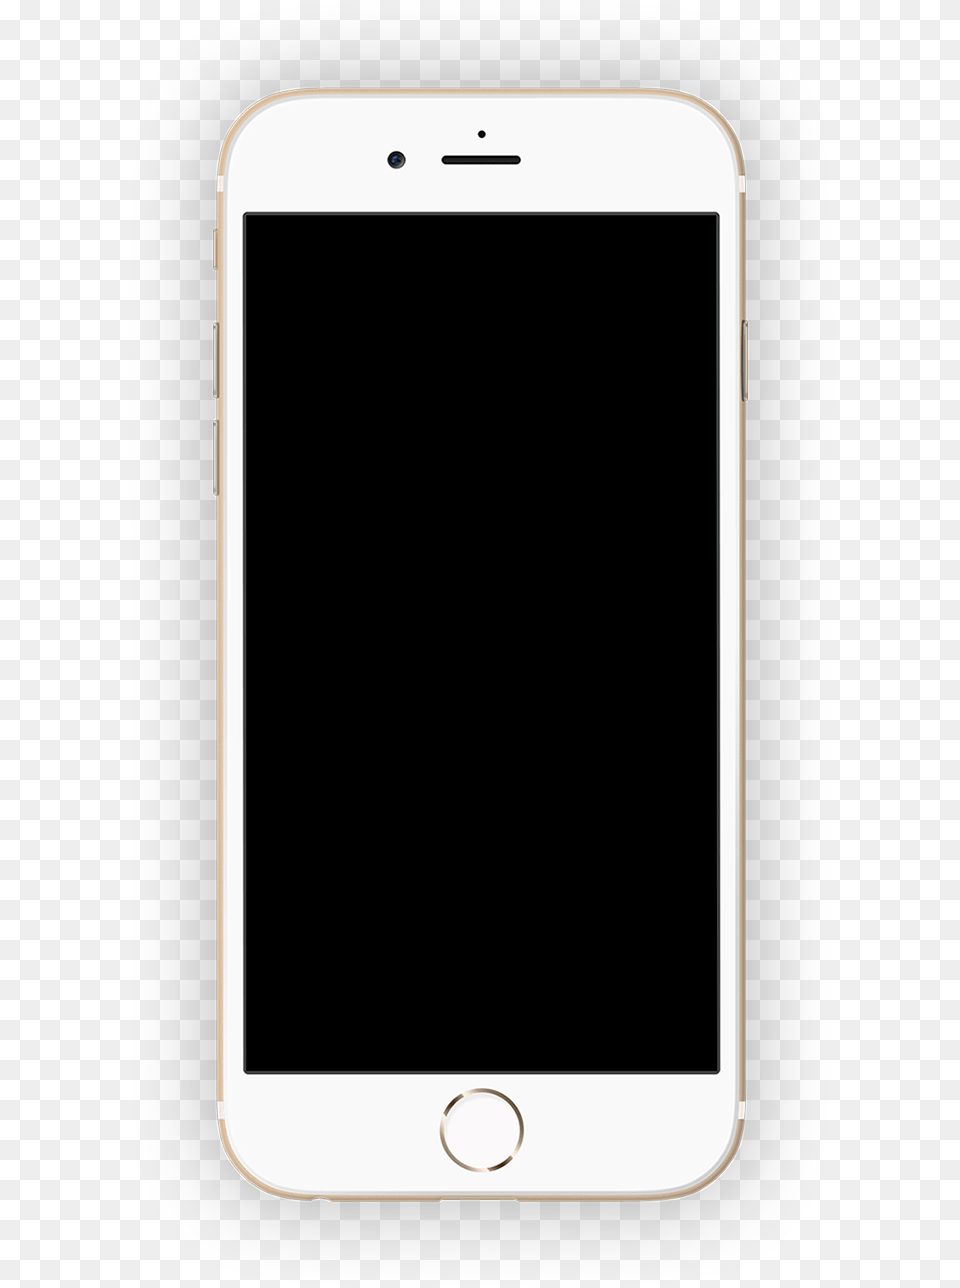 Iphone Mobile Screen Clipart Mobile Screen Iphone, Electronics, Mobile Phone, Phone Png Image